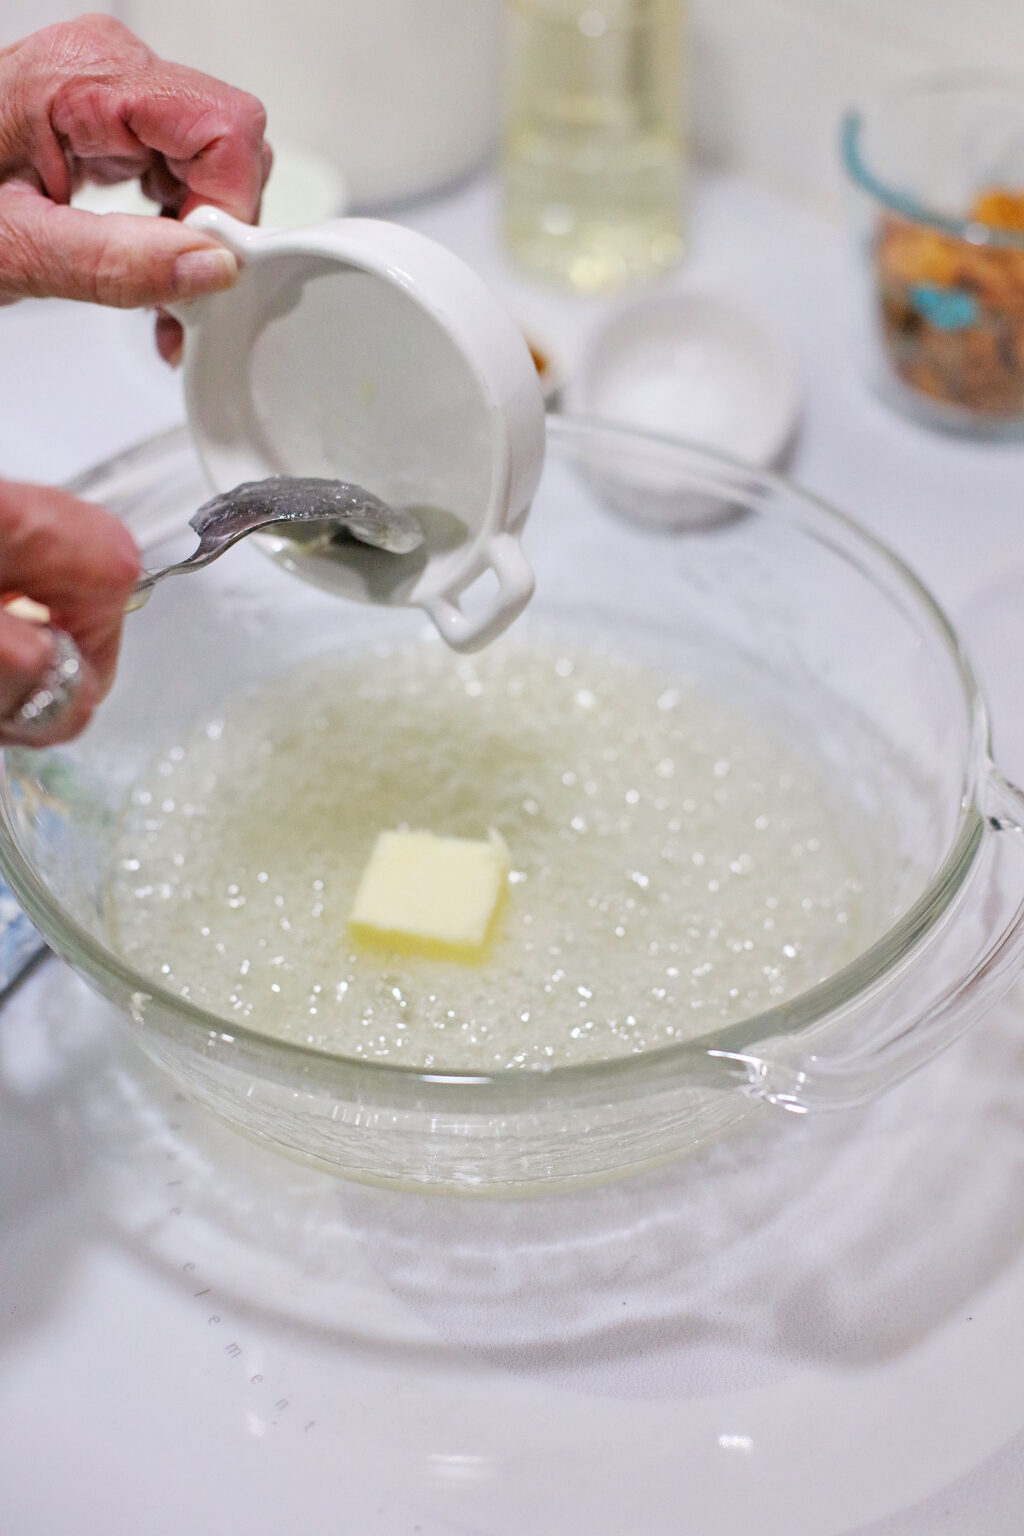 hand adding butter into hot bowl of melted sugar